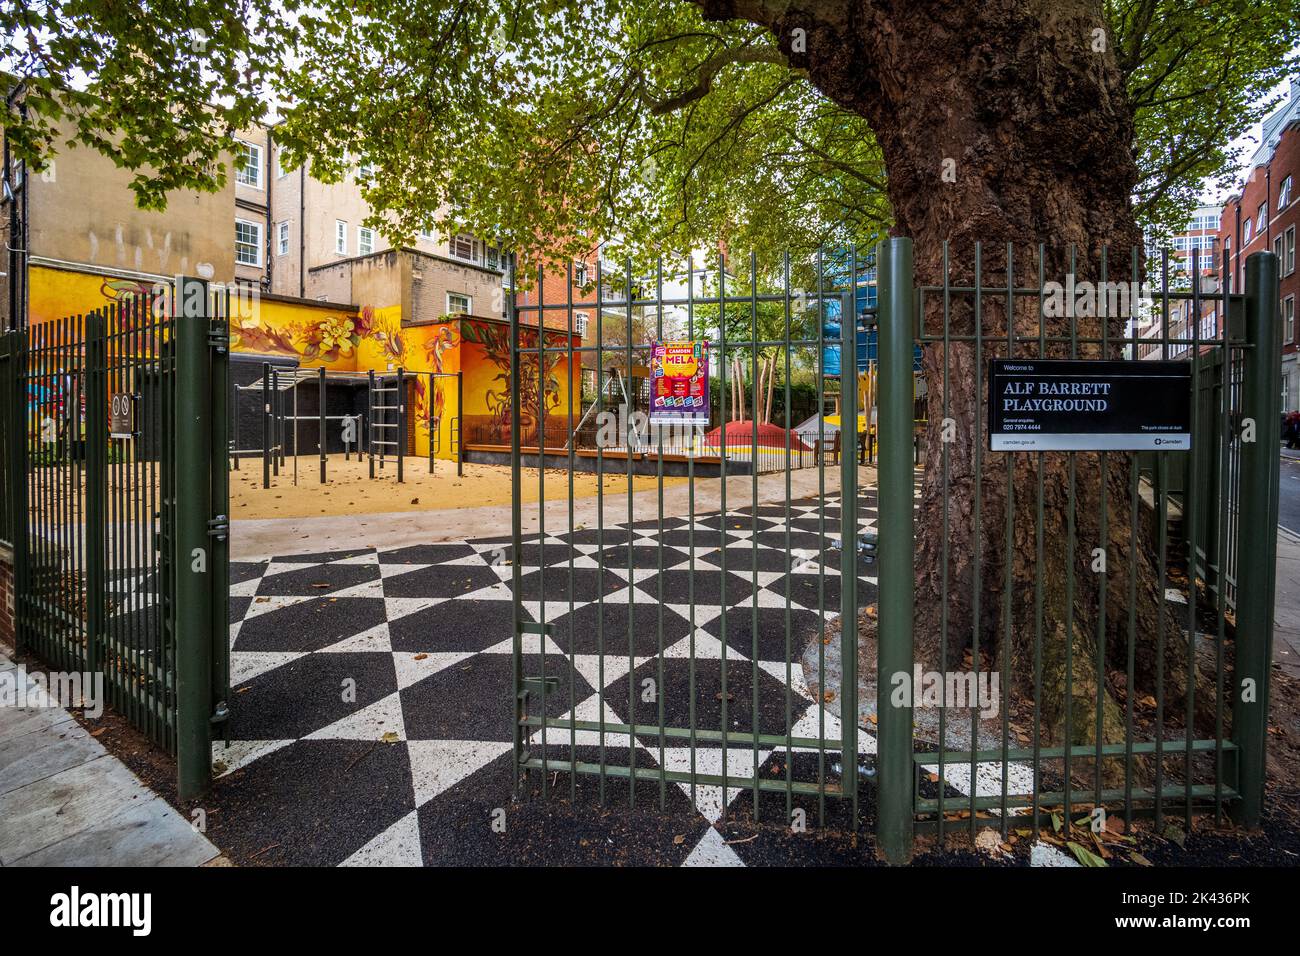 Alf Barrett Playground Holborn London, post WW2 pocket park refurbished 2022. Formerly known as the Old Gloucester Street playground. Stock Photo